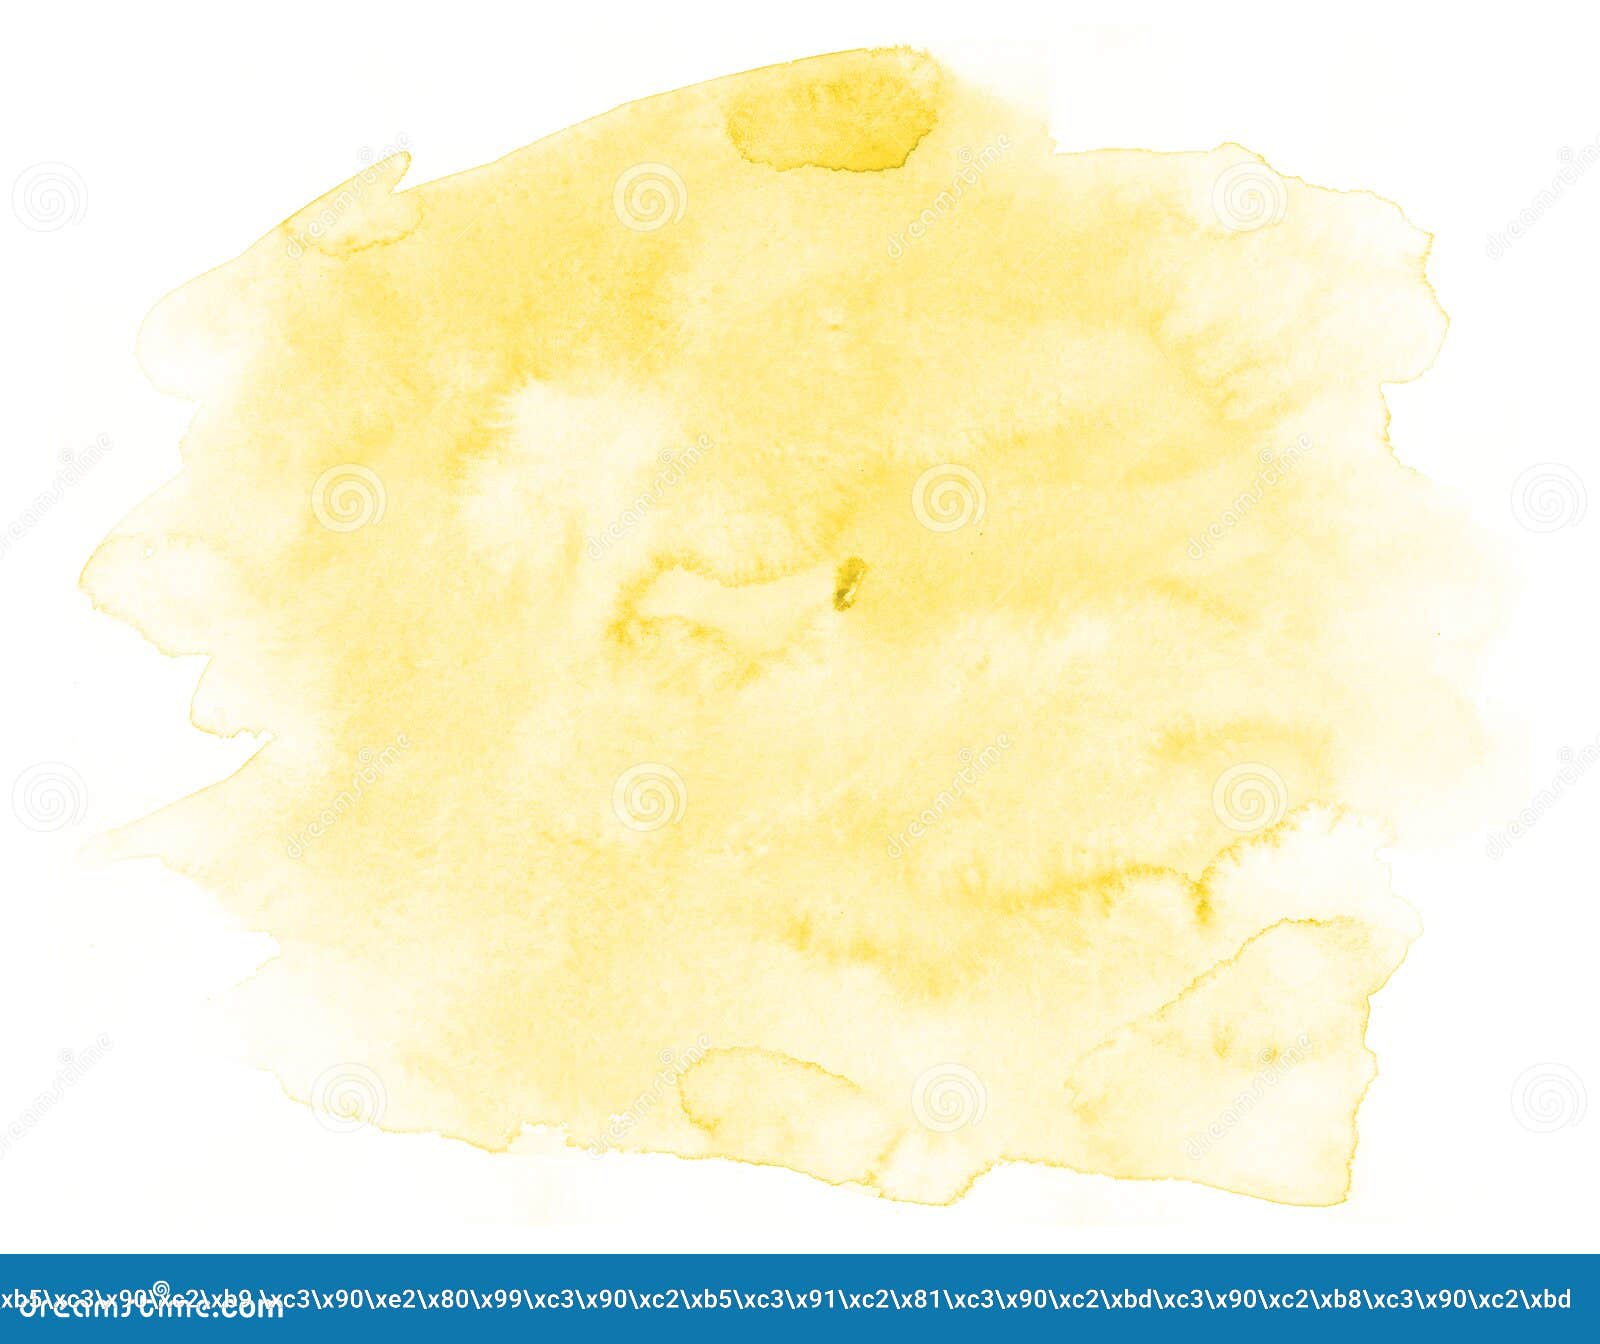 Soft Yellow Watercolor Background, Soft Shades of Paint on White Paper ...